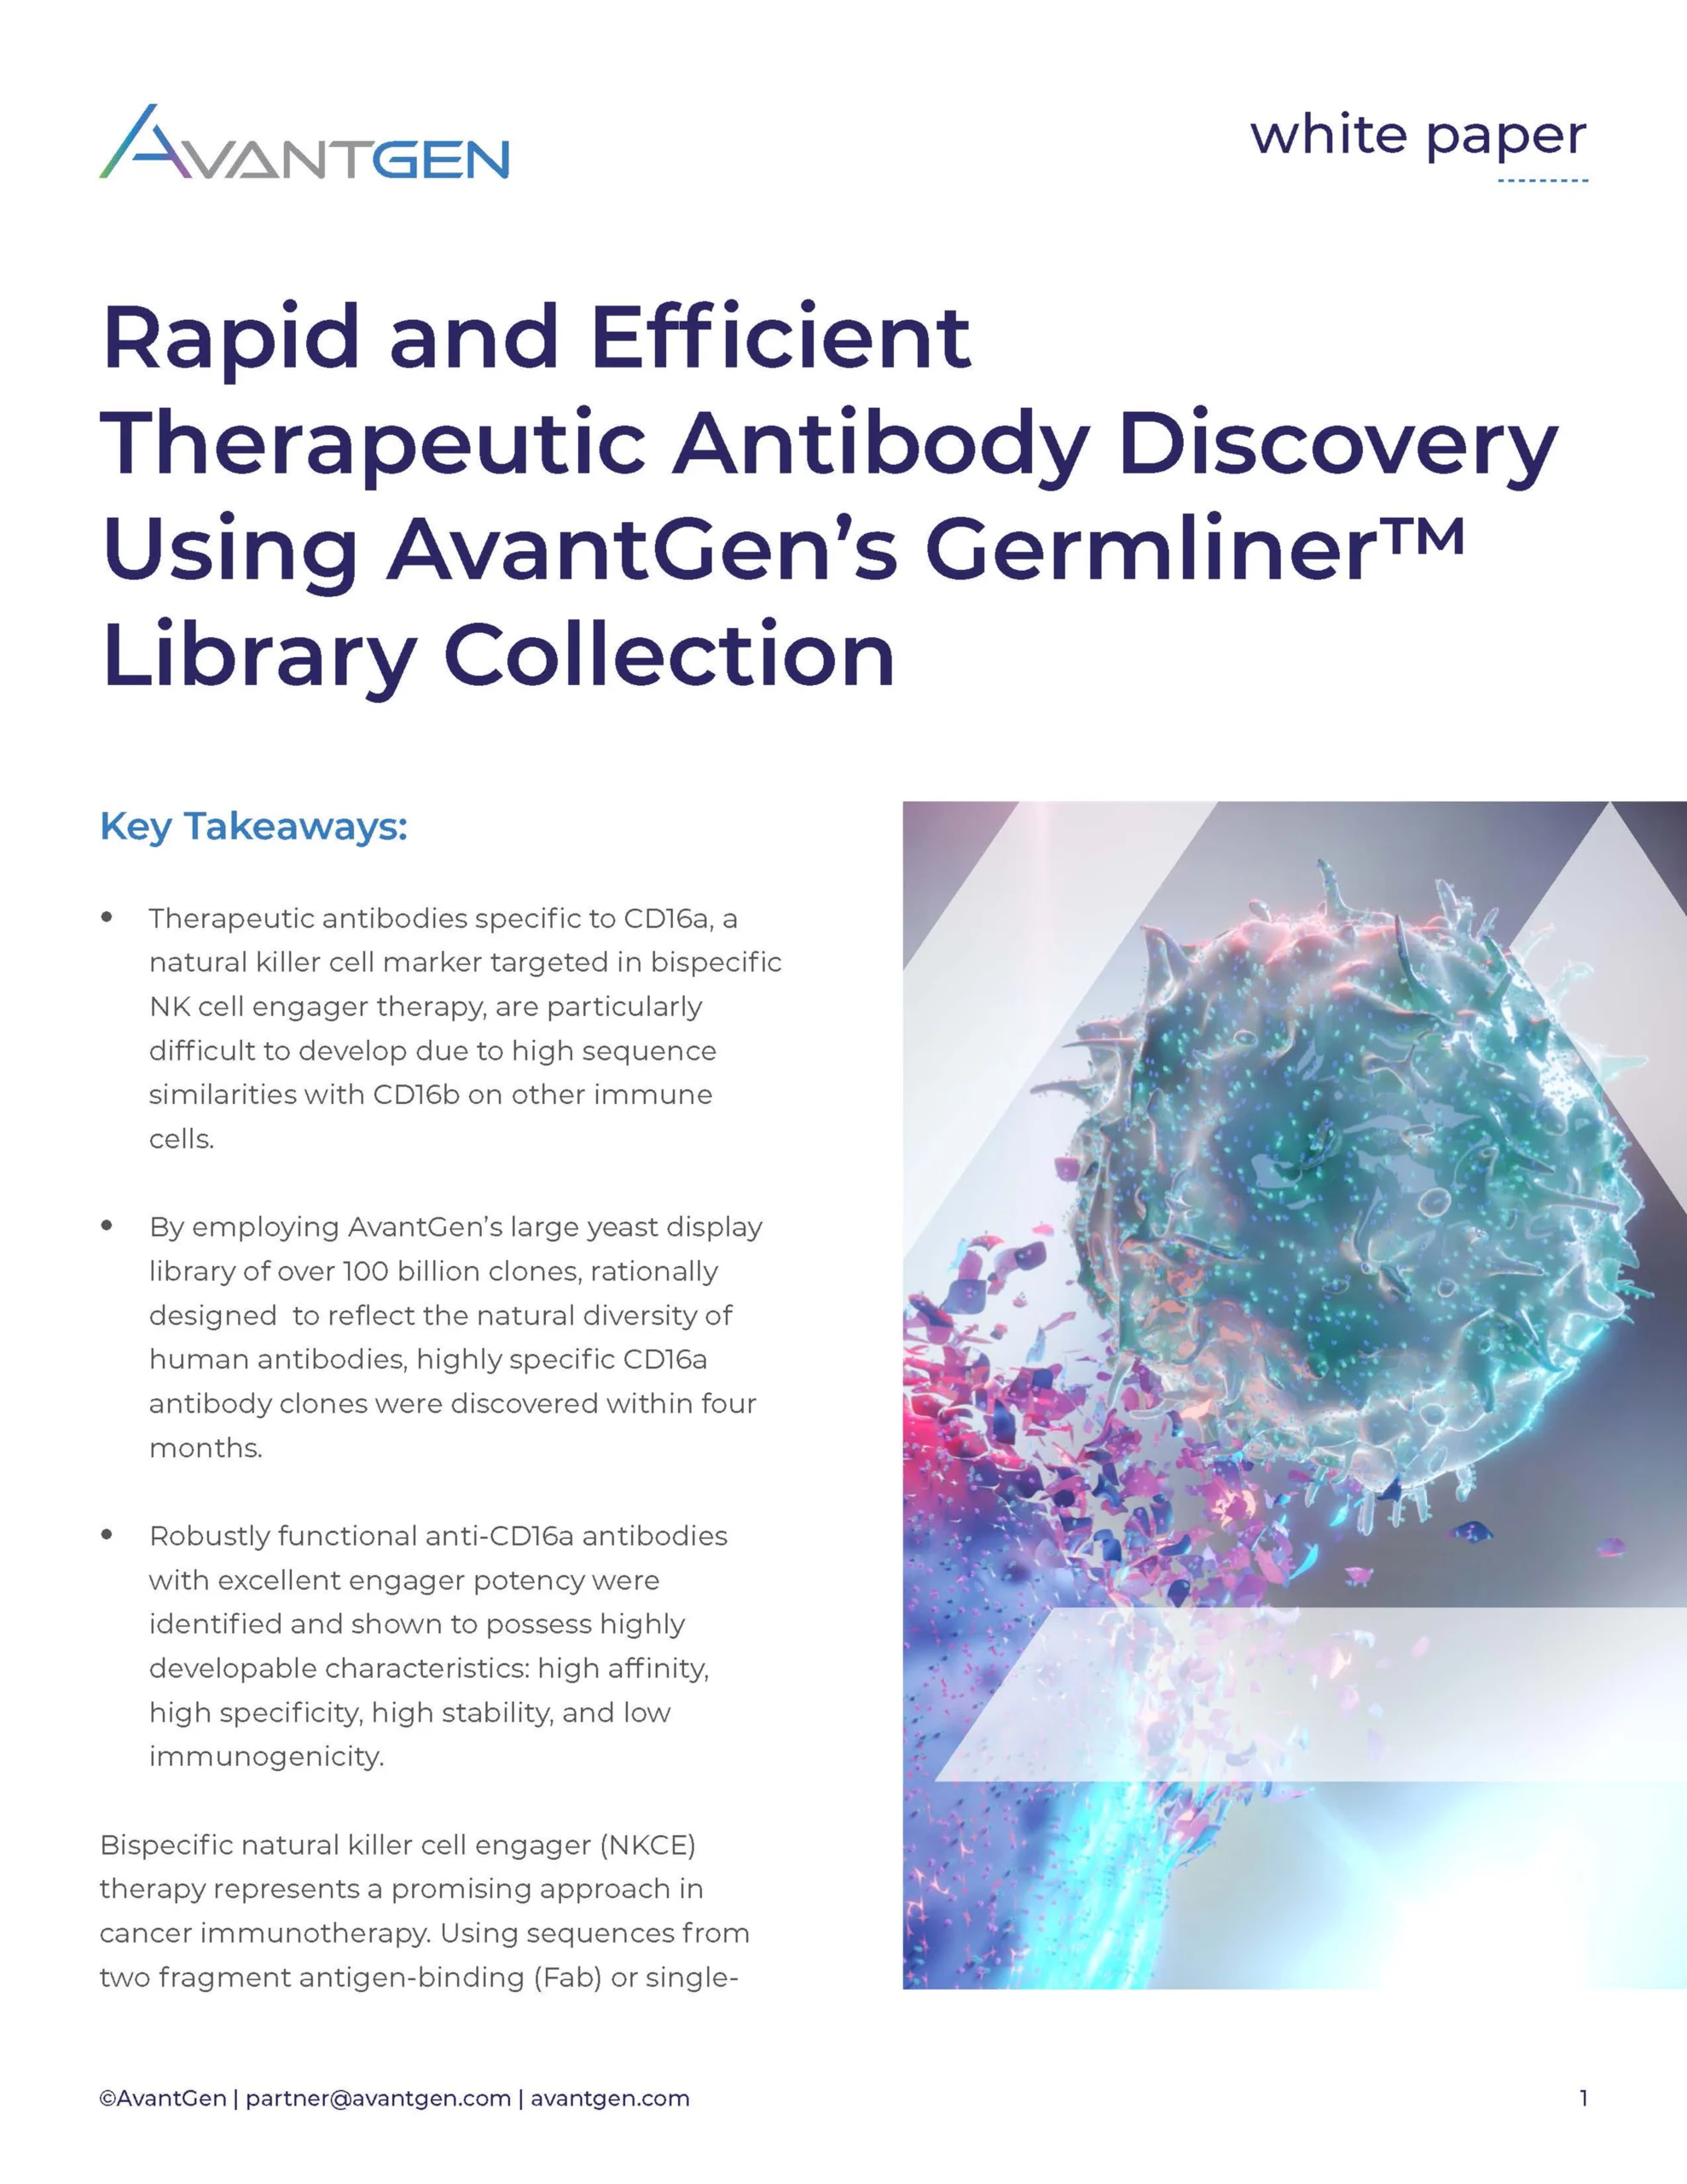 Rapid and Efficient Therapeutic Antibody Discovery Using AvantGen’s Germliner™ Library Collection